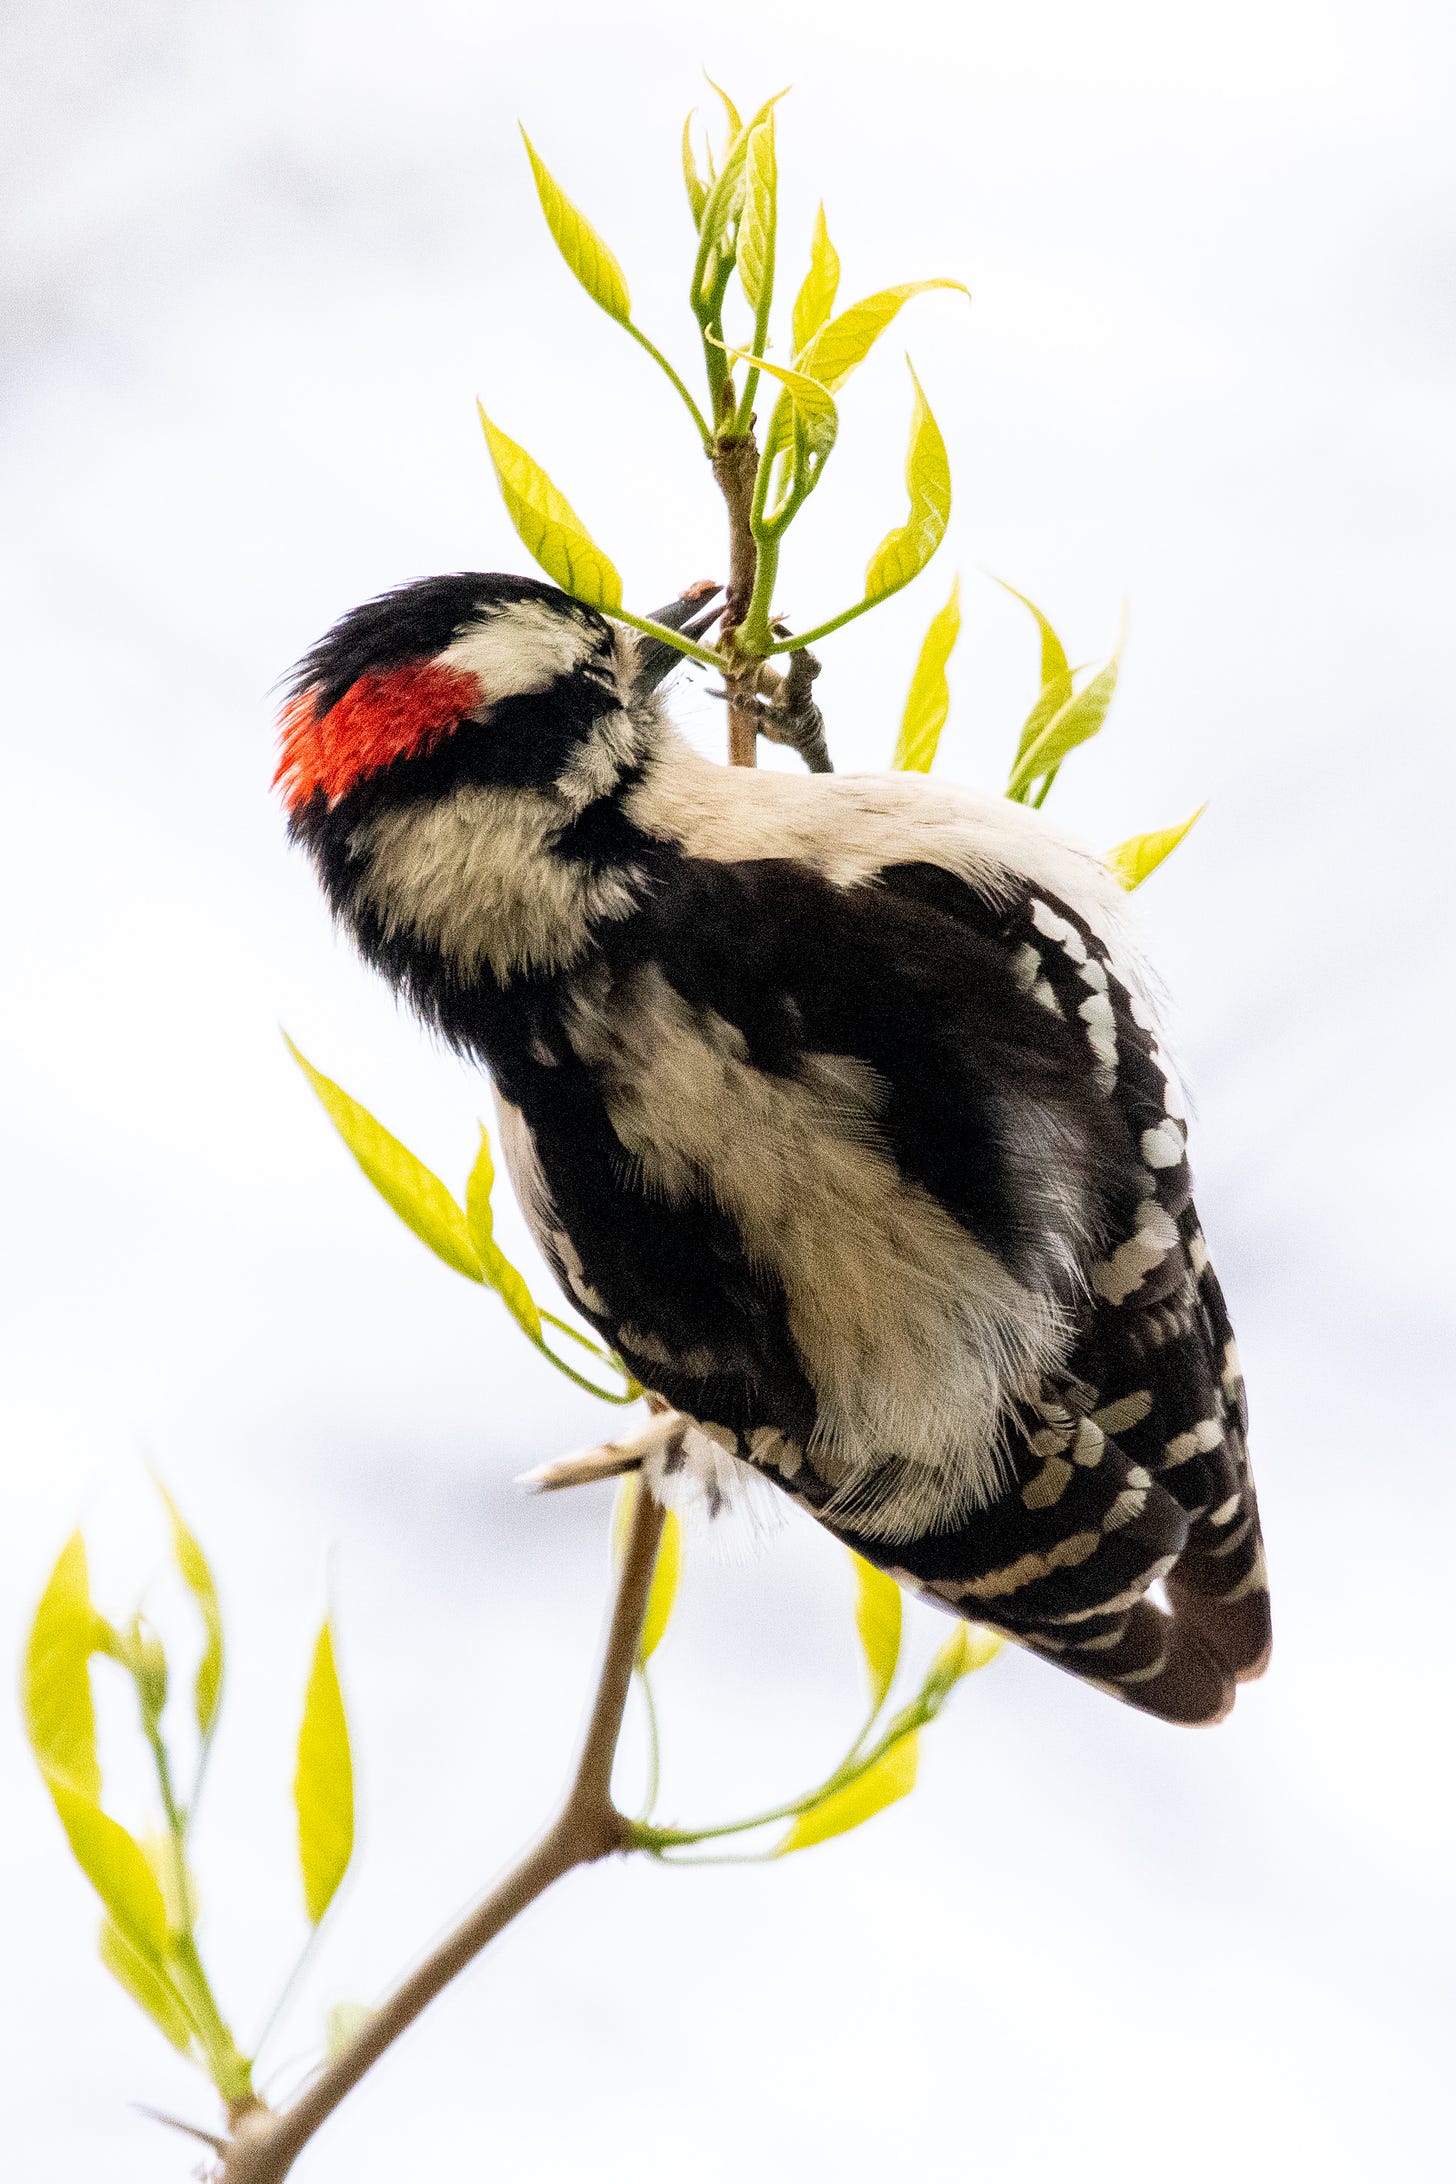 A downy woodpecker, seen from behind, in an osage orange tree